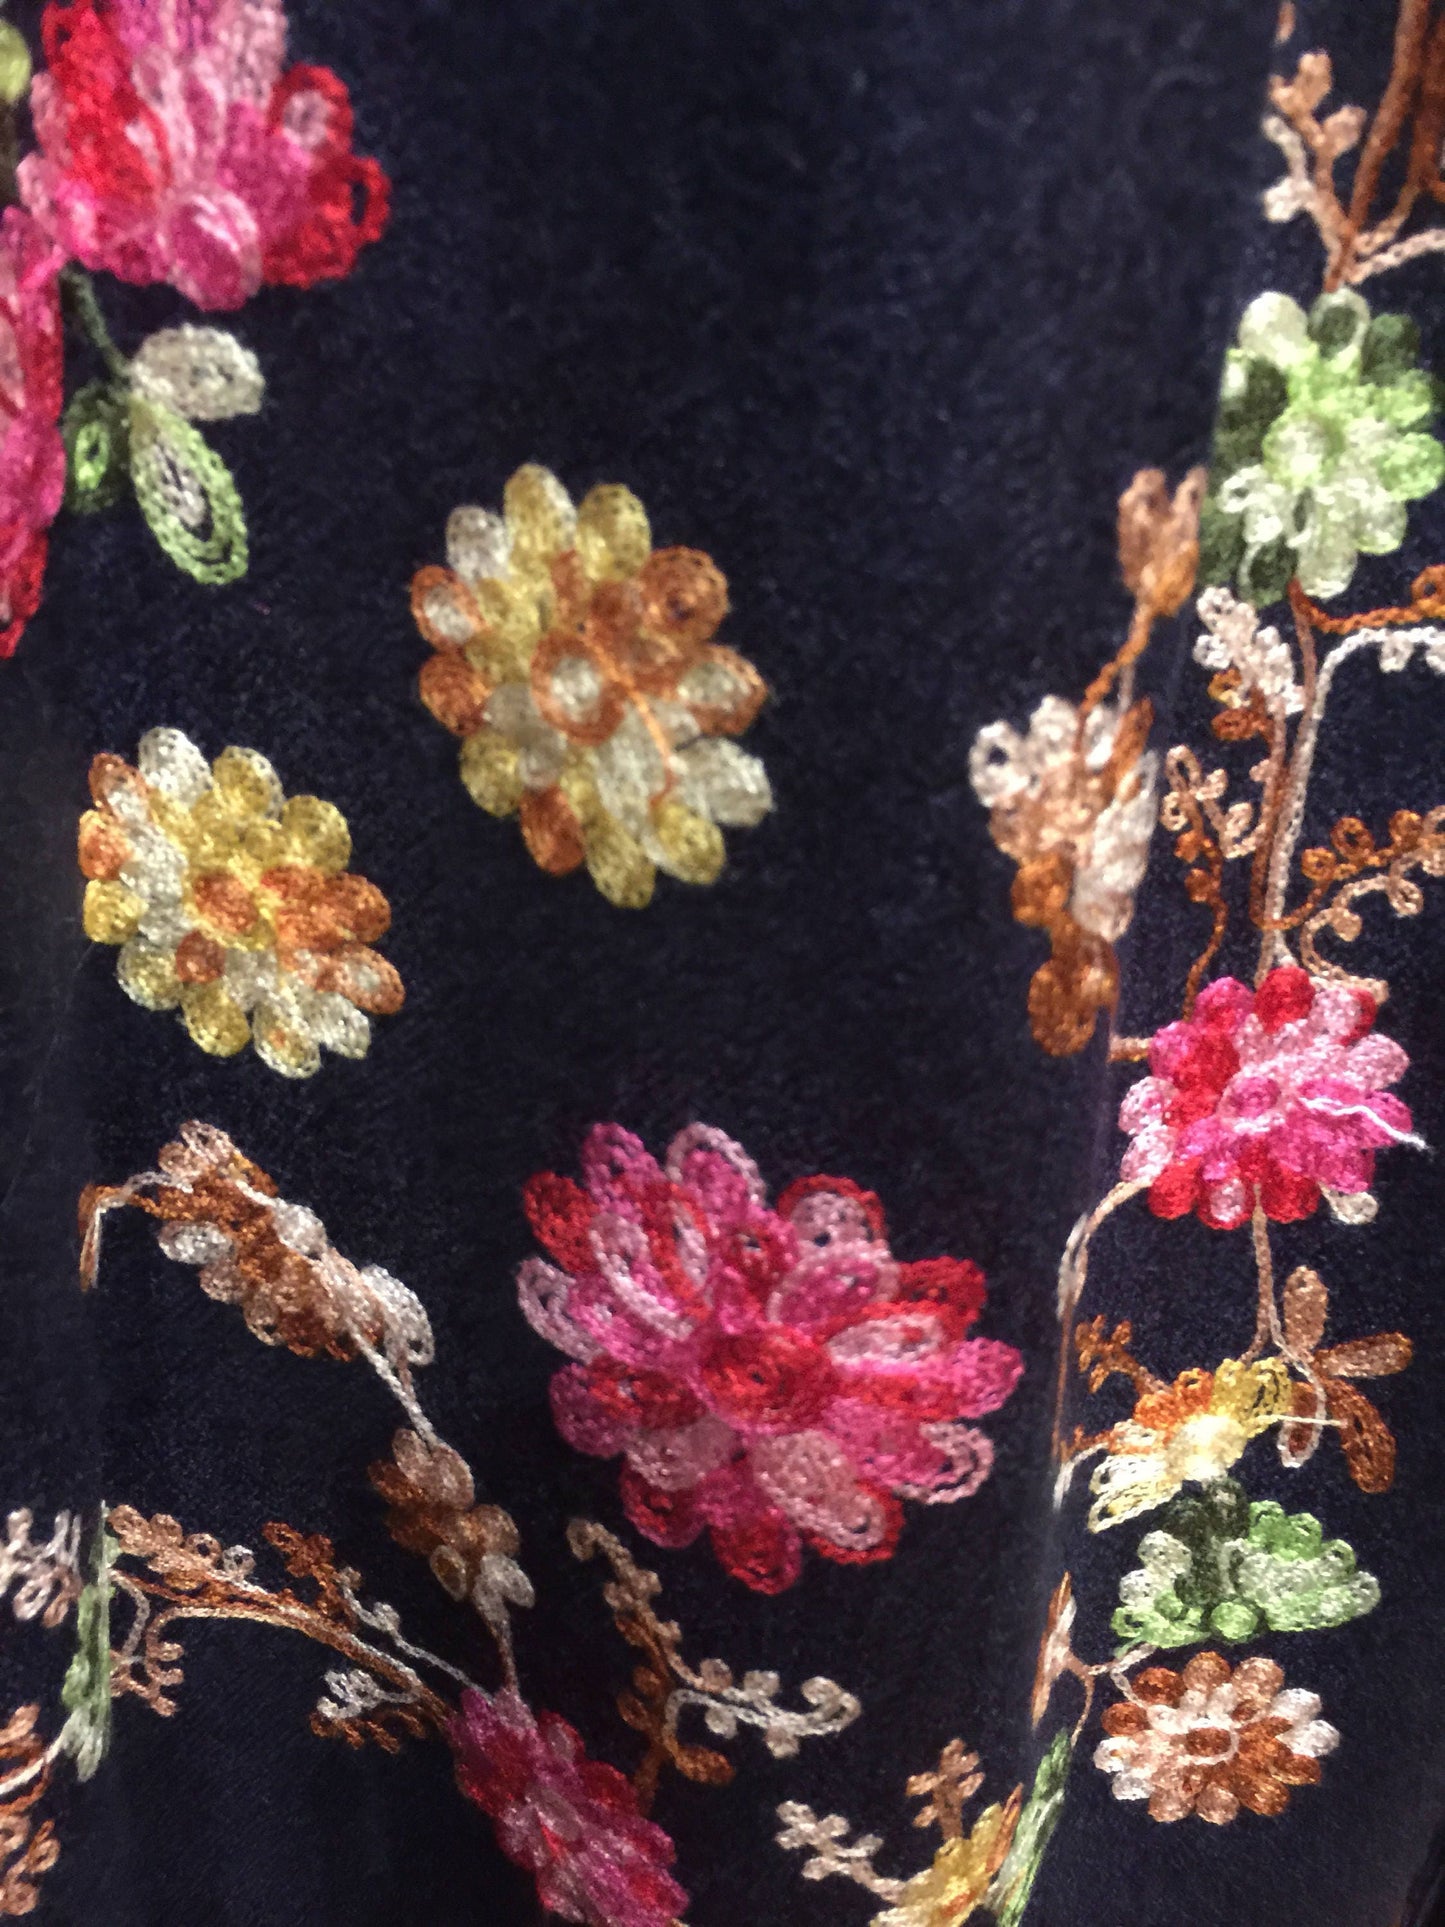 Vitage Styled Mixed Colored Flower Embroidered Pashmina Shawl